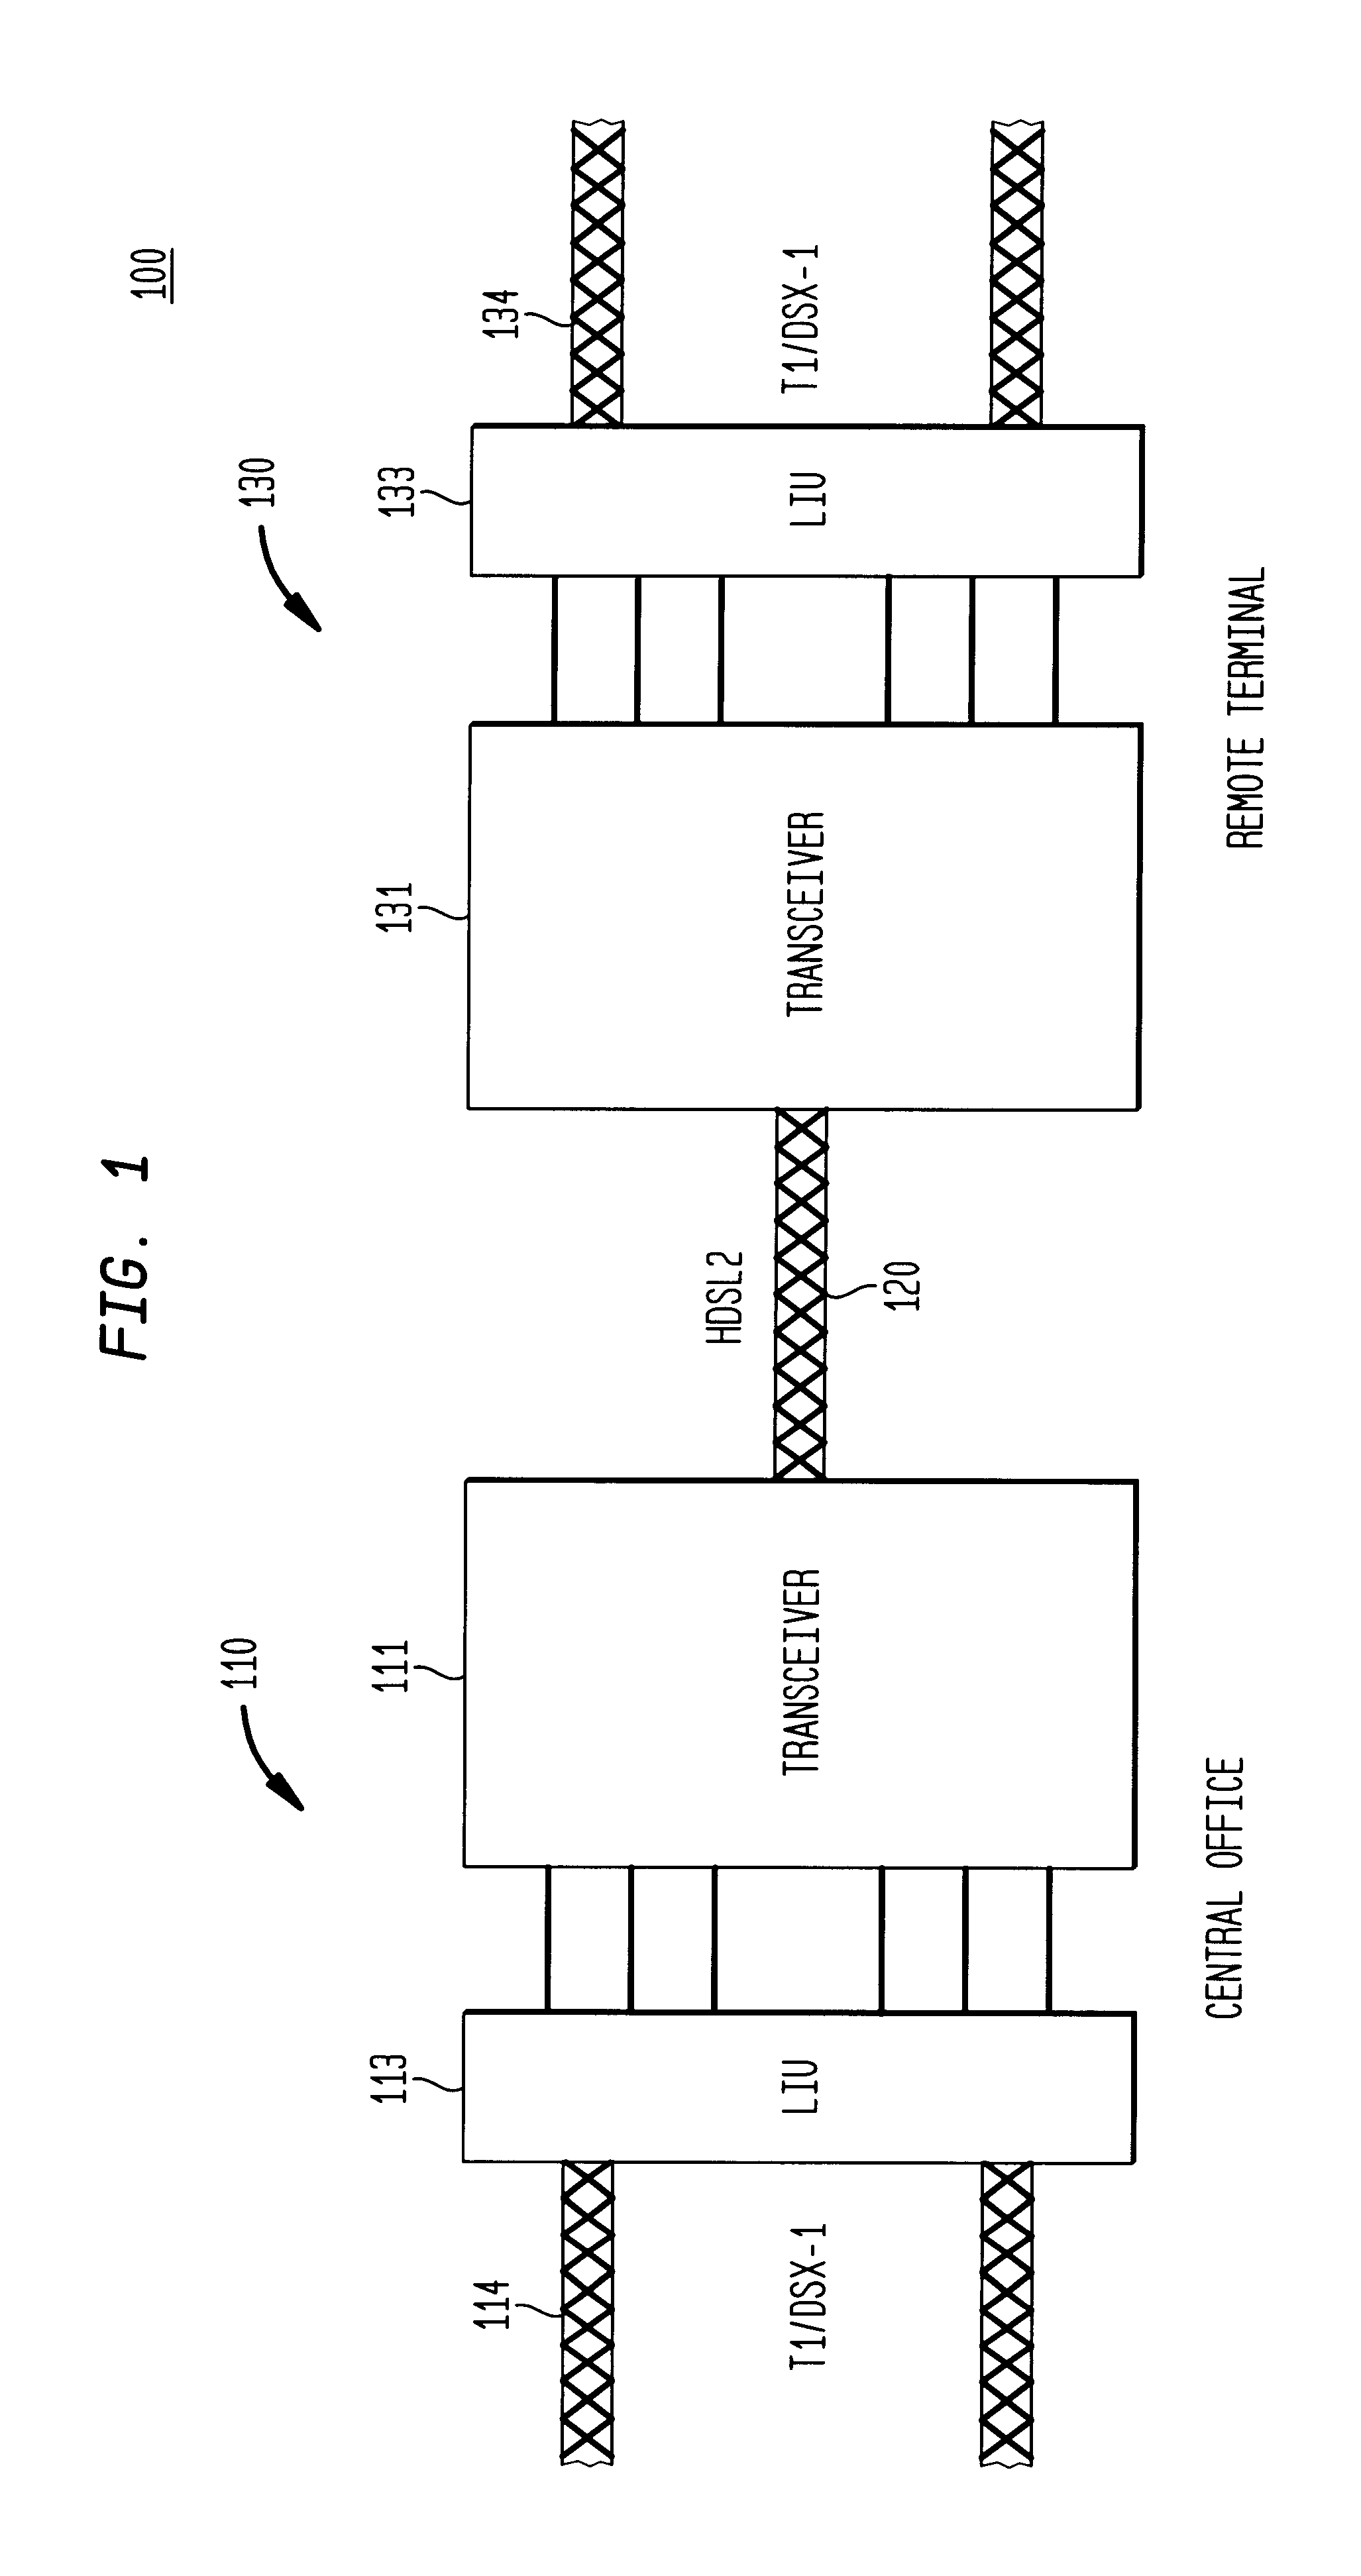 Separation circuit for an echo canceling system and method of operating the same